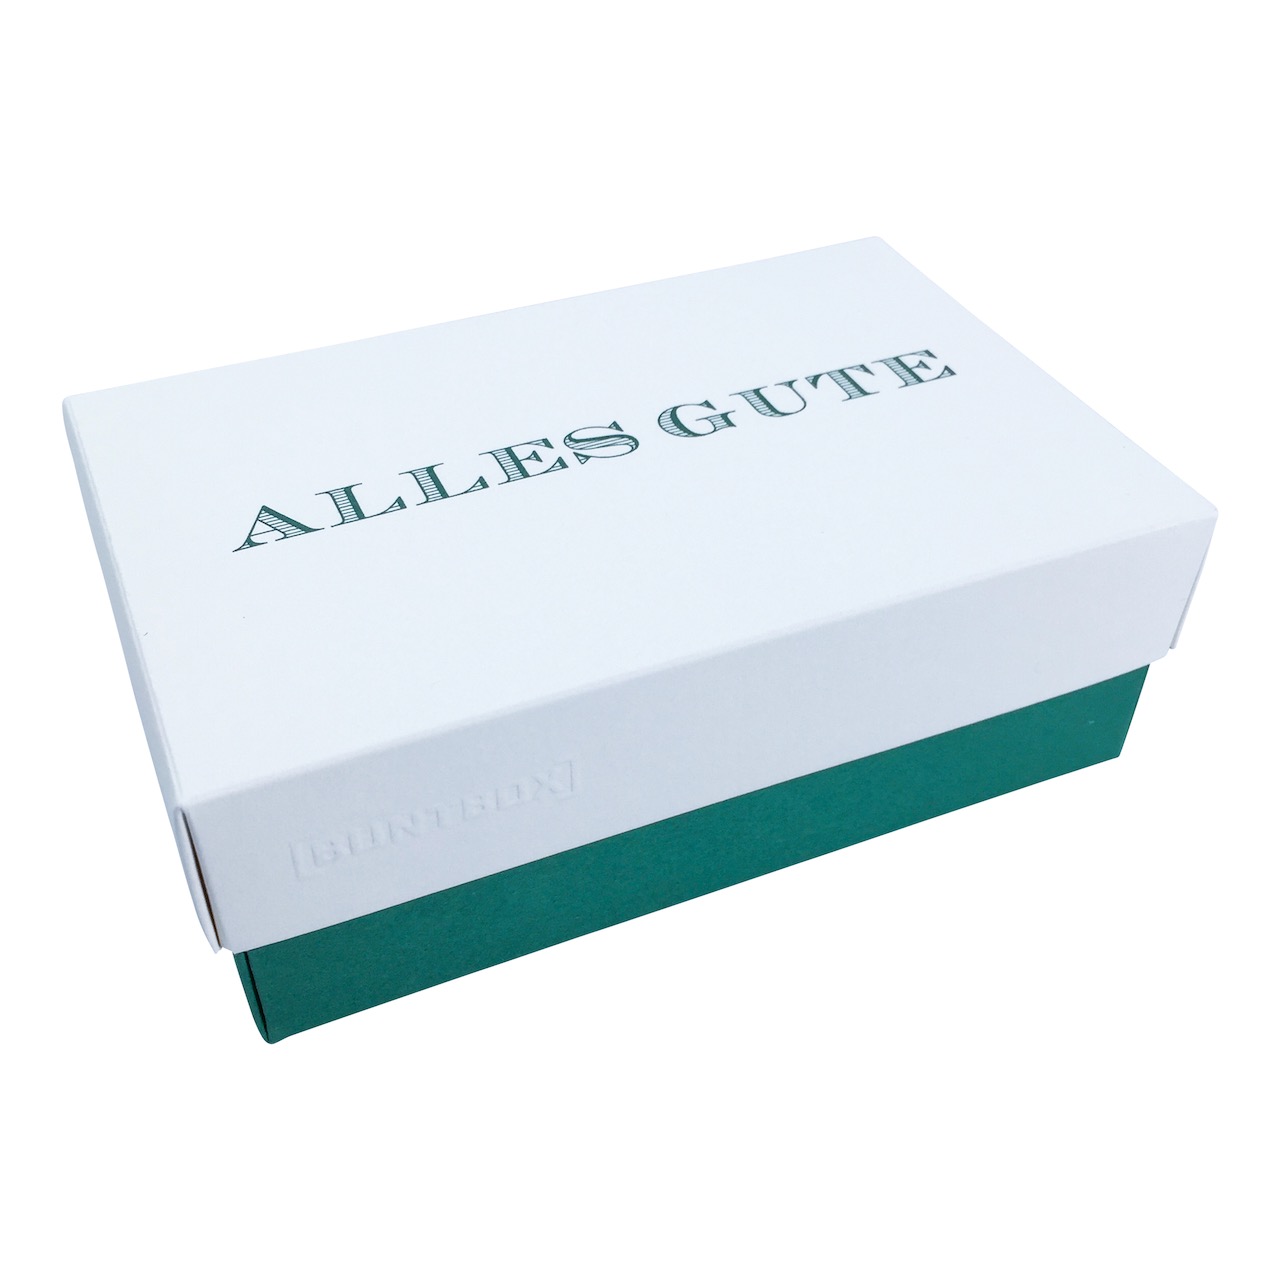 Buntbox S Fine Paper Alles Gute in Champagner-Emerald